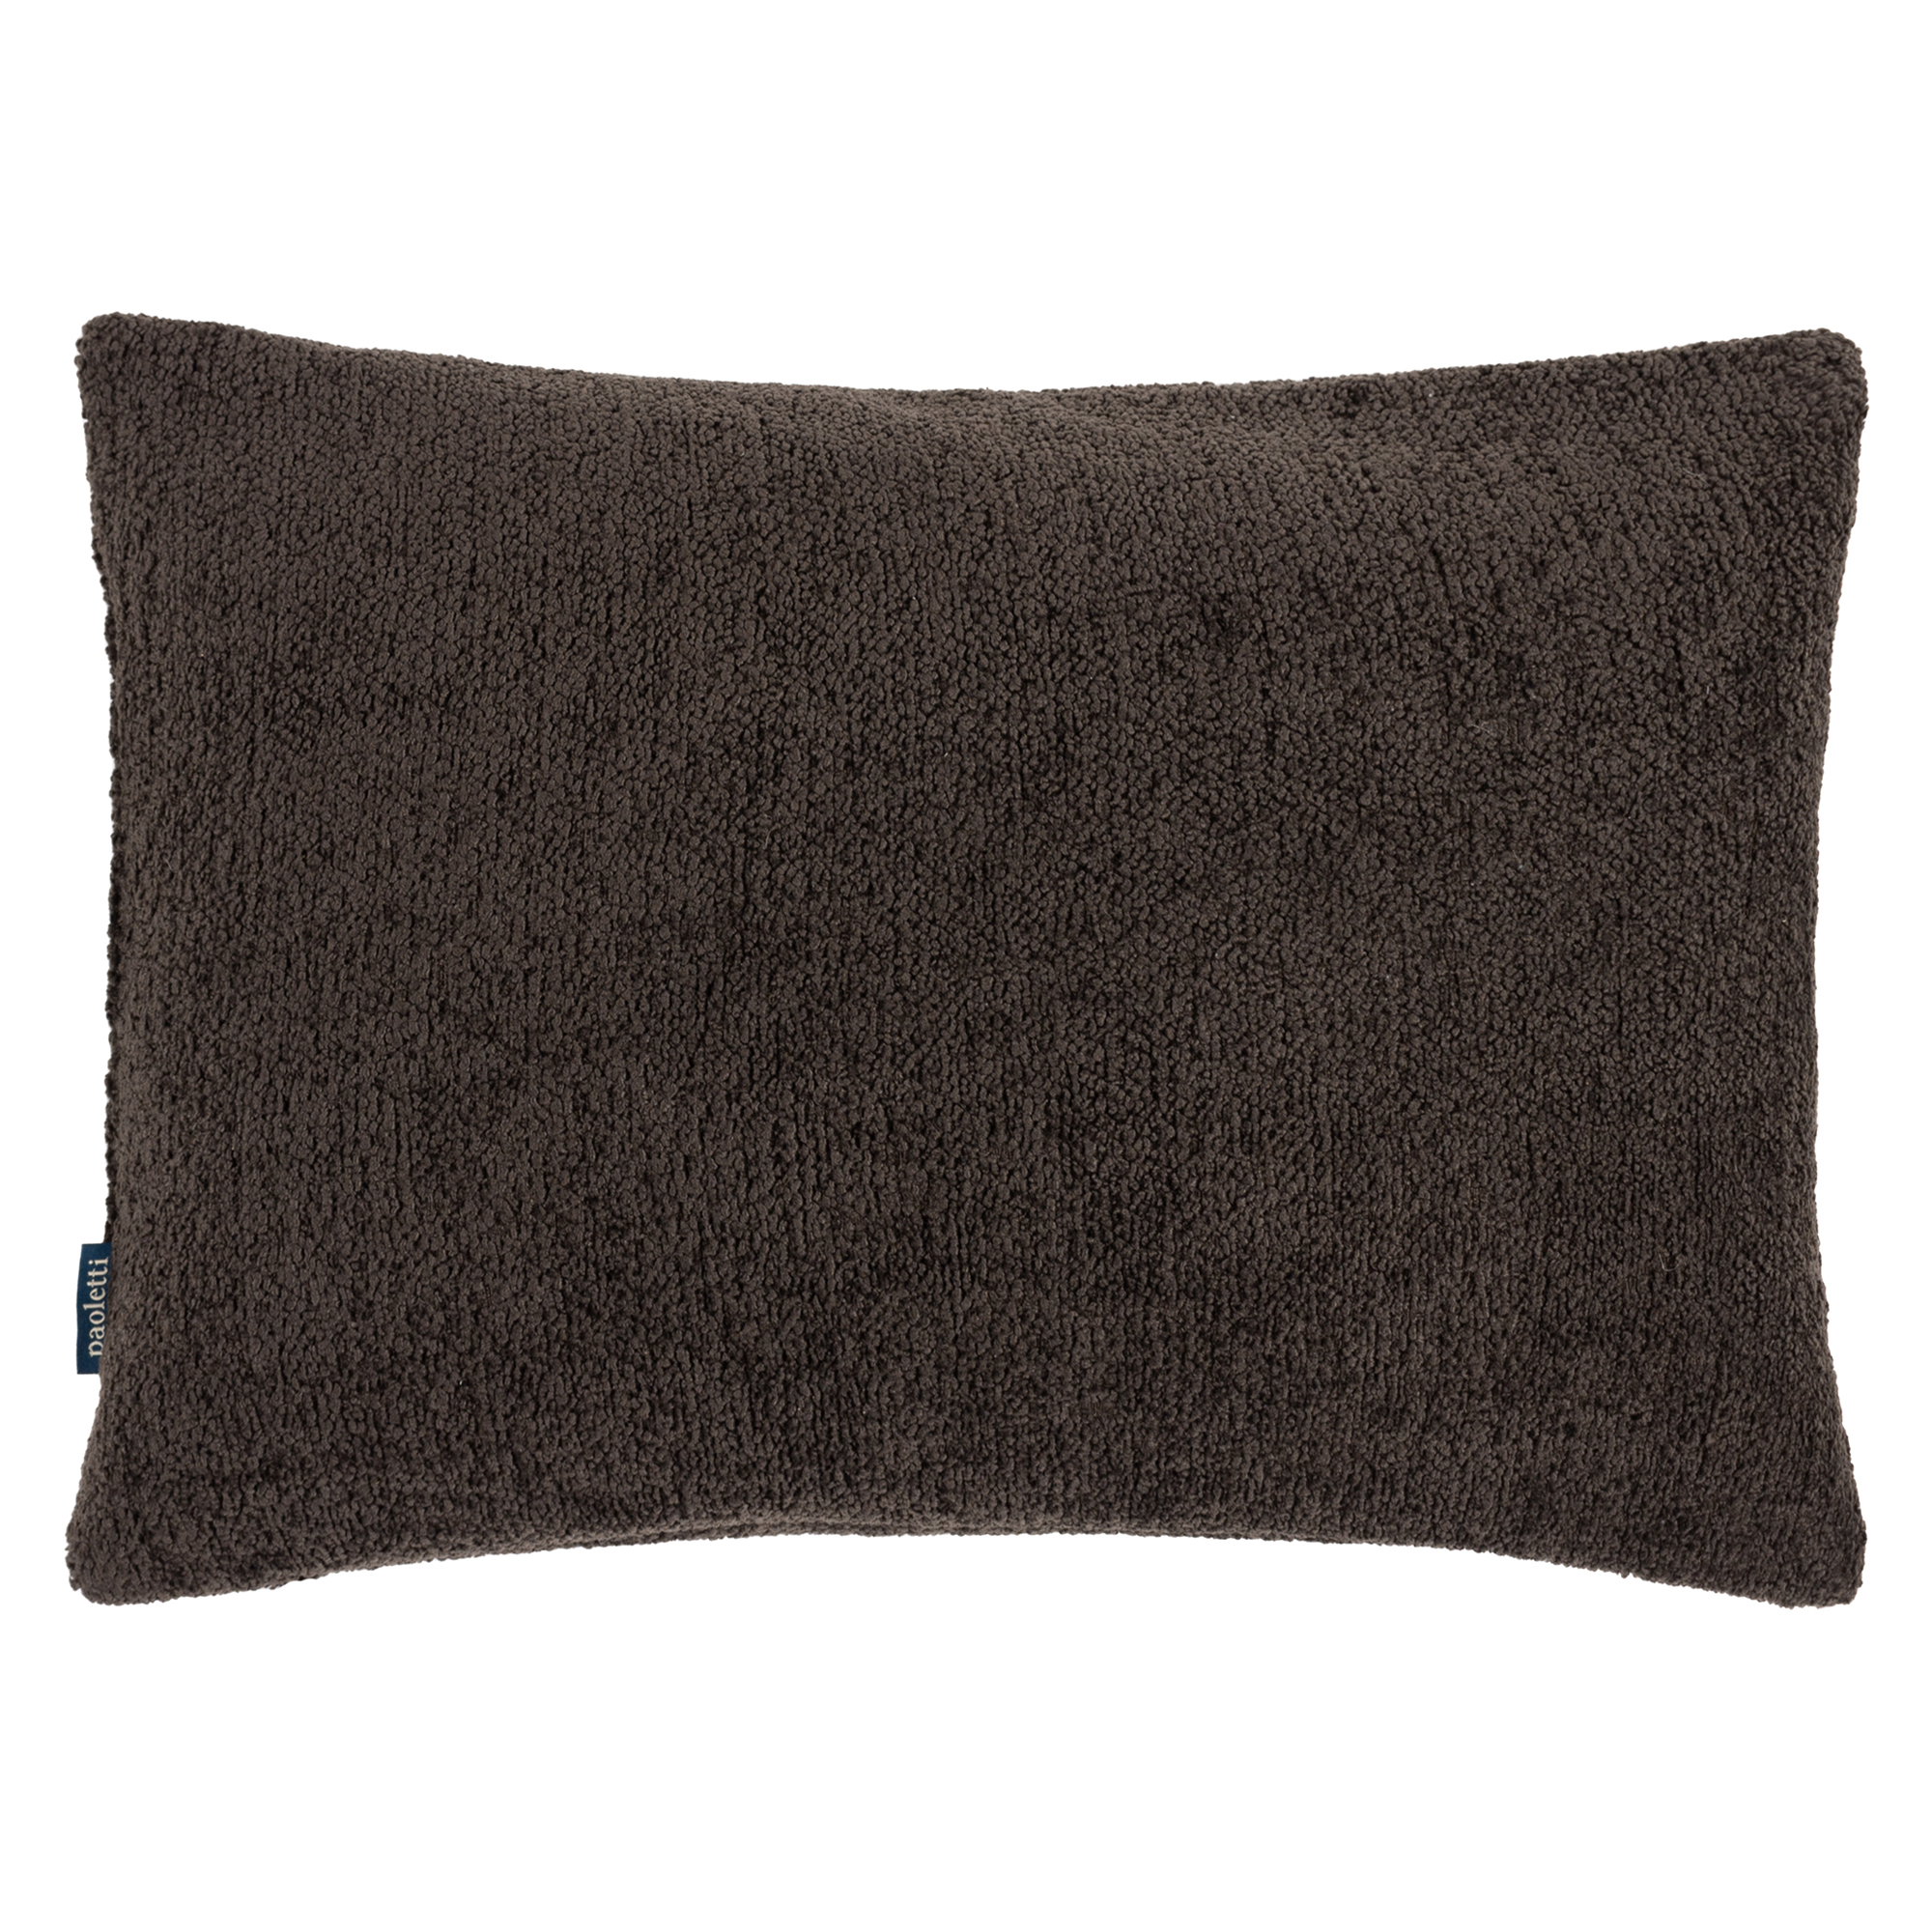 Umber Boucle Cushion, Square, Brown | Barker & Stonehouse